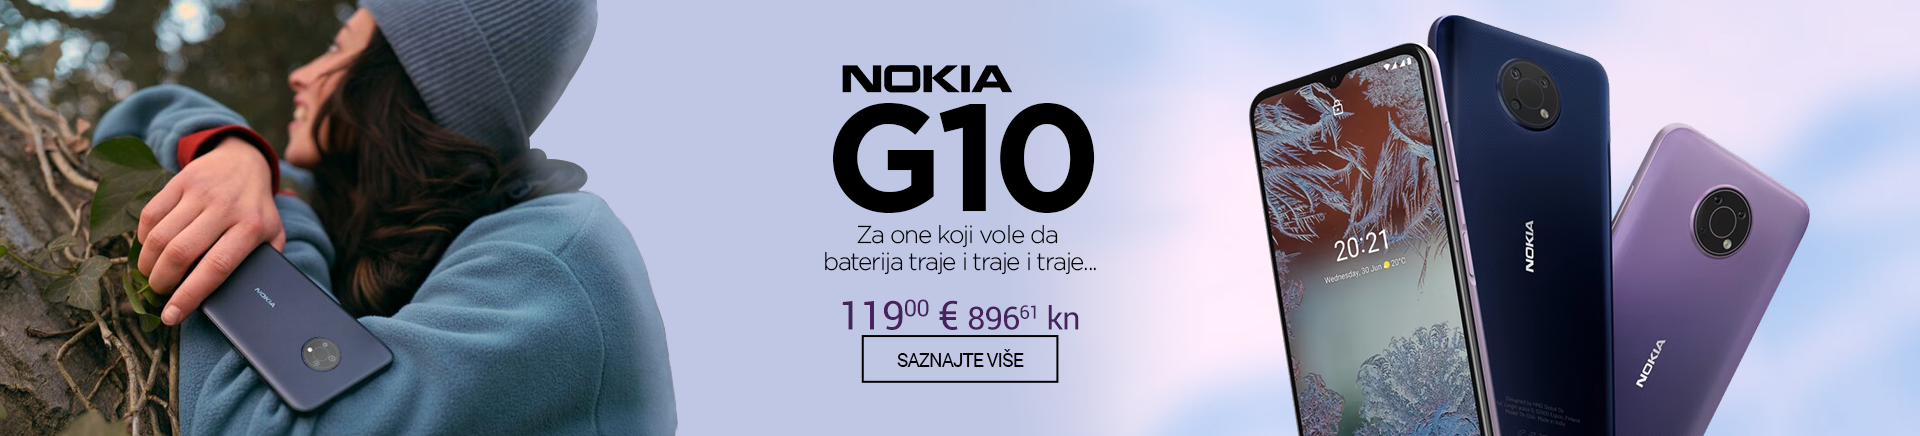 HR Nokia G10 MOBILE 380 X 436.png